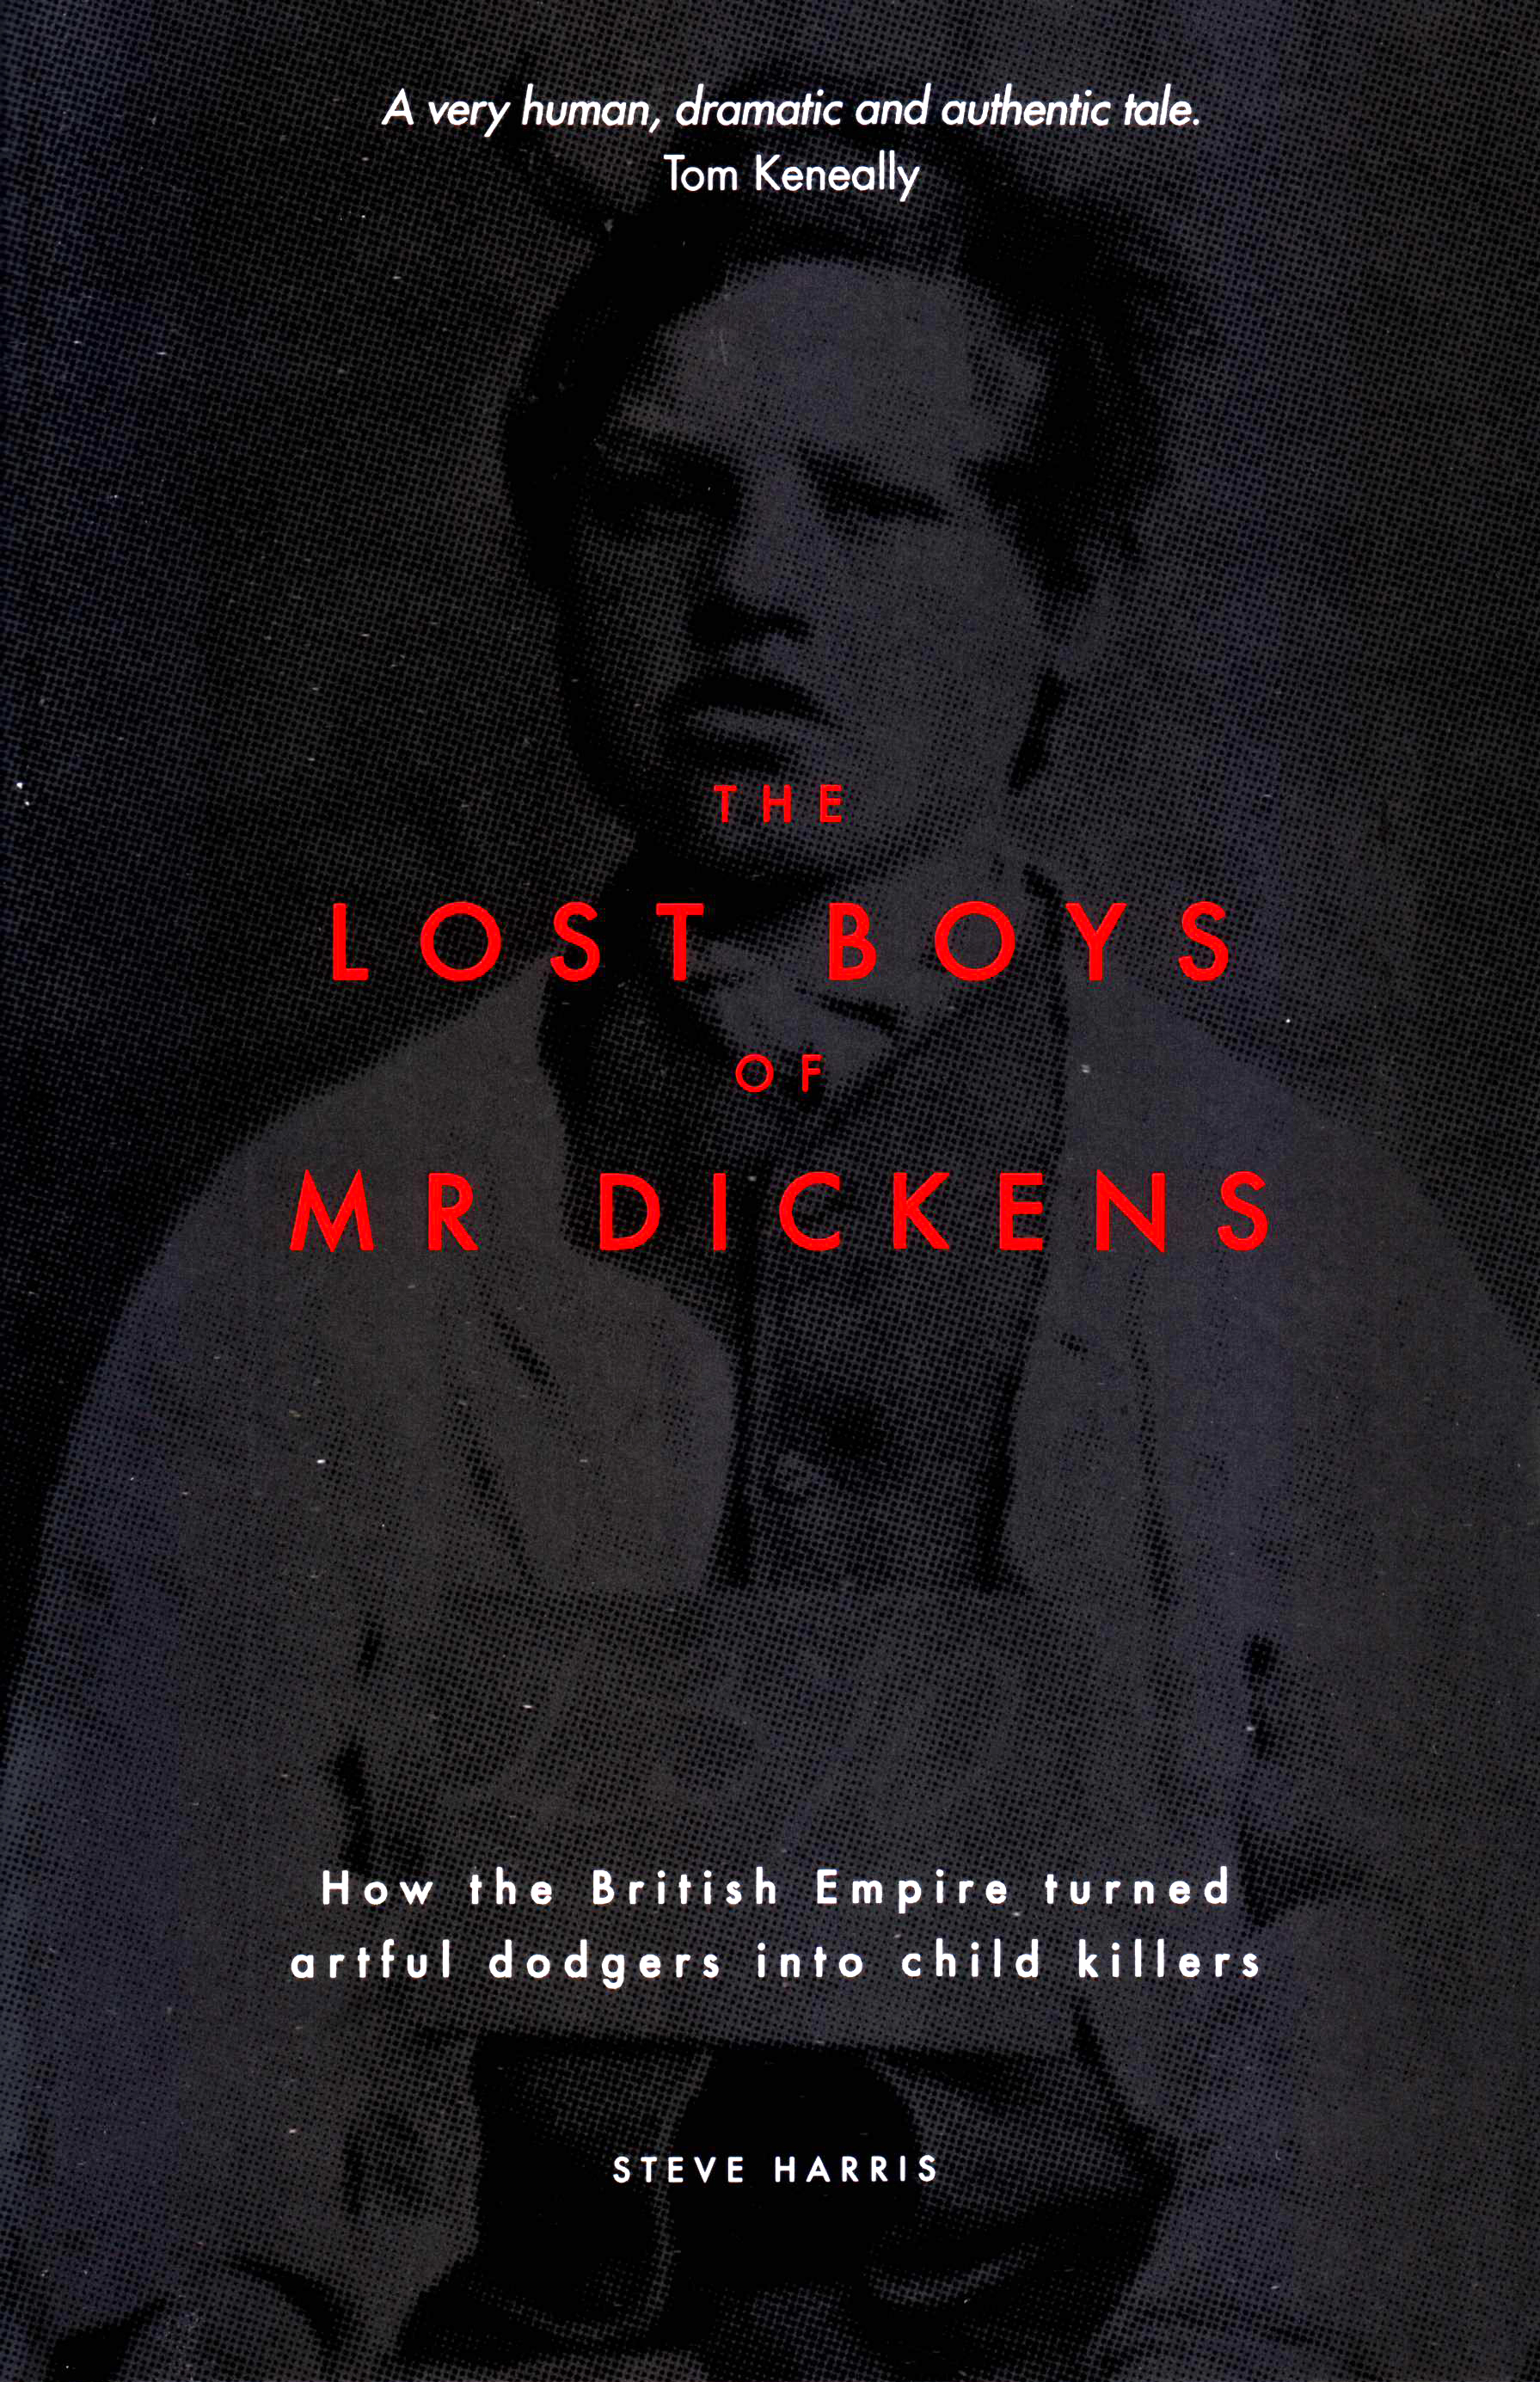 The Lost Boys of Mr Dickens: How the British Empire turned a